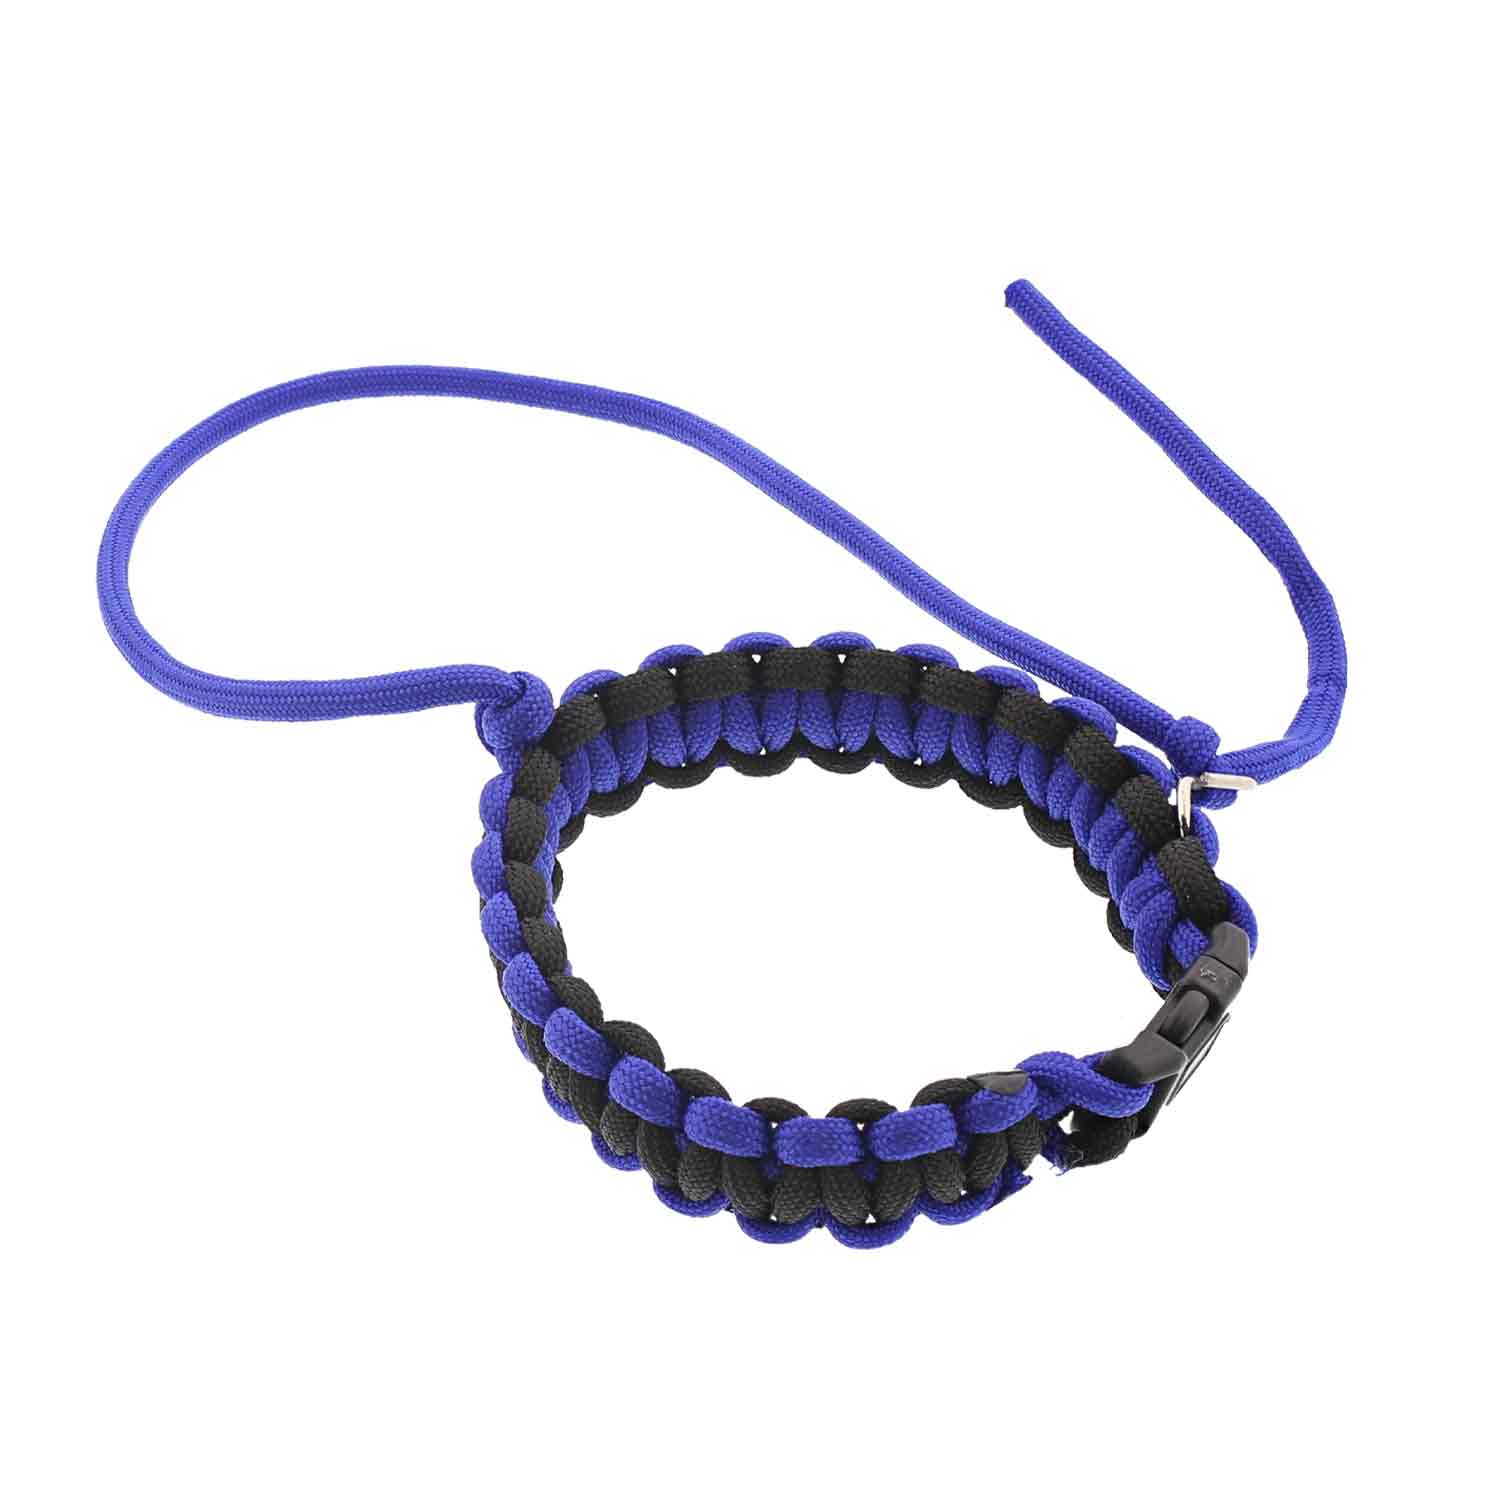 LAS  Cobra Braided Wrist Sling with Buckle and Hook